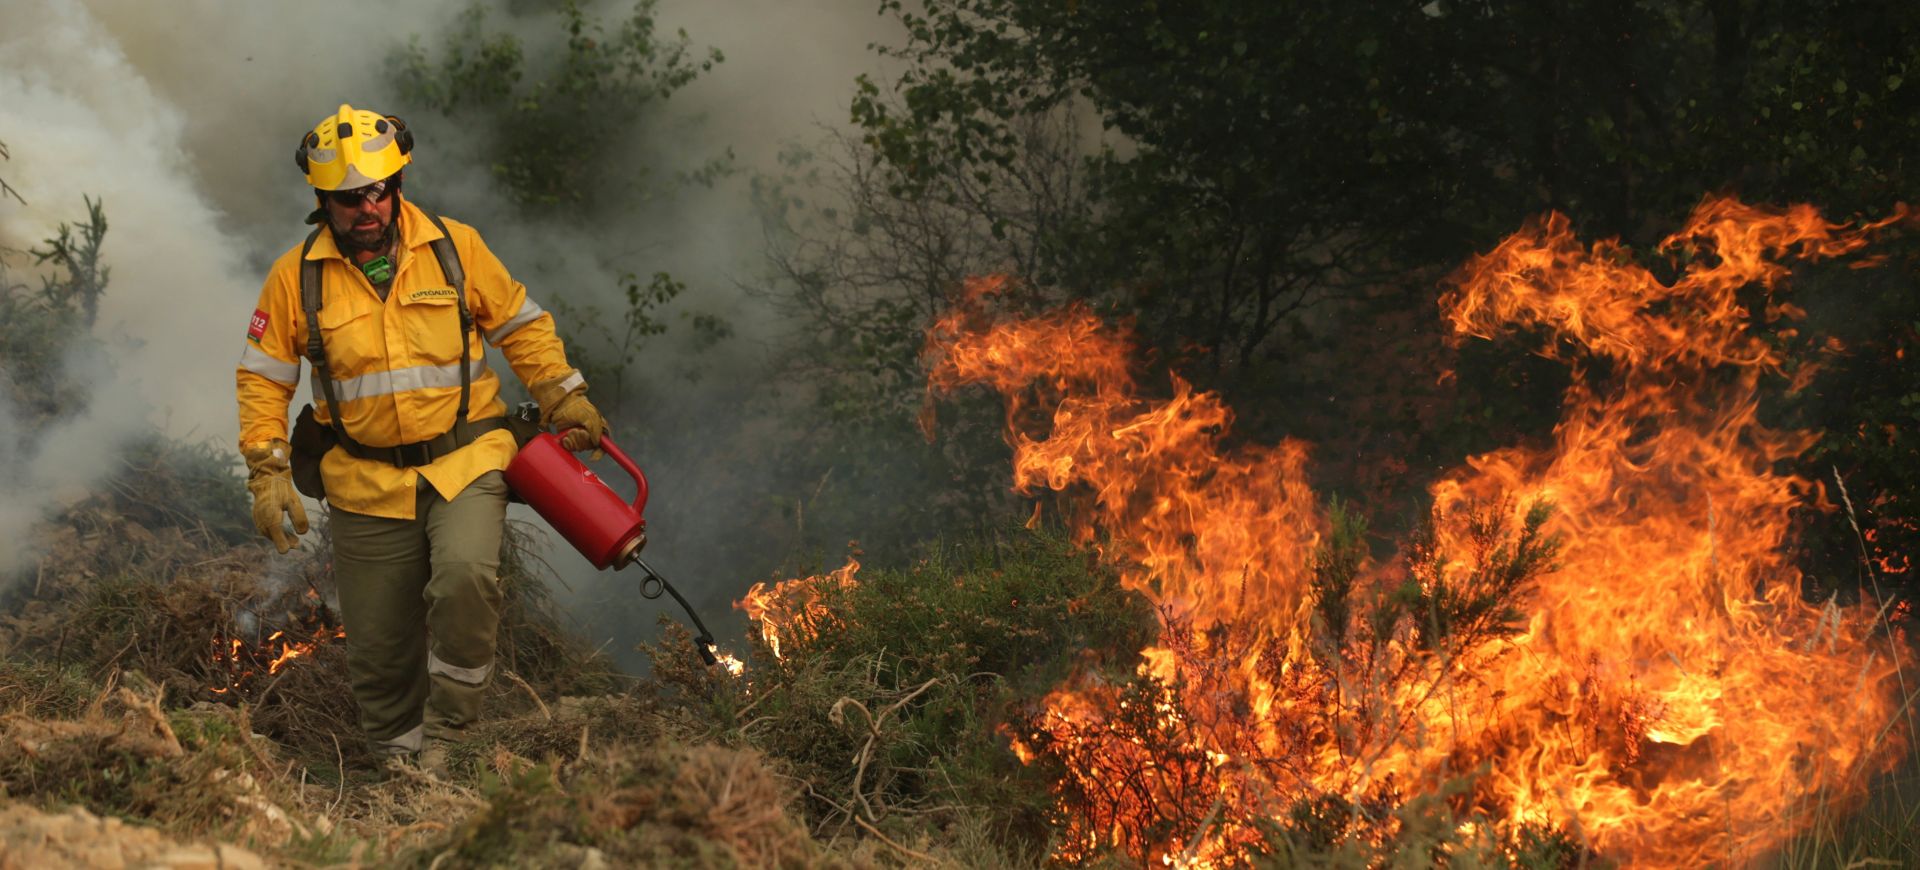 epa06041990 A Spanish specialist firefighter ignites a controlled fire on Alto do Soeirinho, as they fight the forest fire in Pampilhosa da Serra, center of Portugal, 21 June 2017. The wildfires in the center of Portugal gather 1153 firemen, 403 land vehicules, and 14 planes and helicopters.  EPA/TIAGO PETINGA